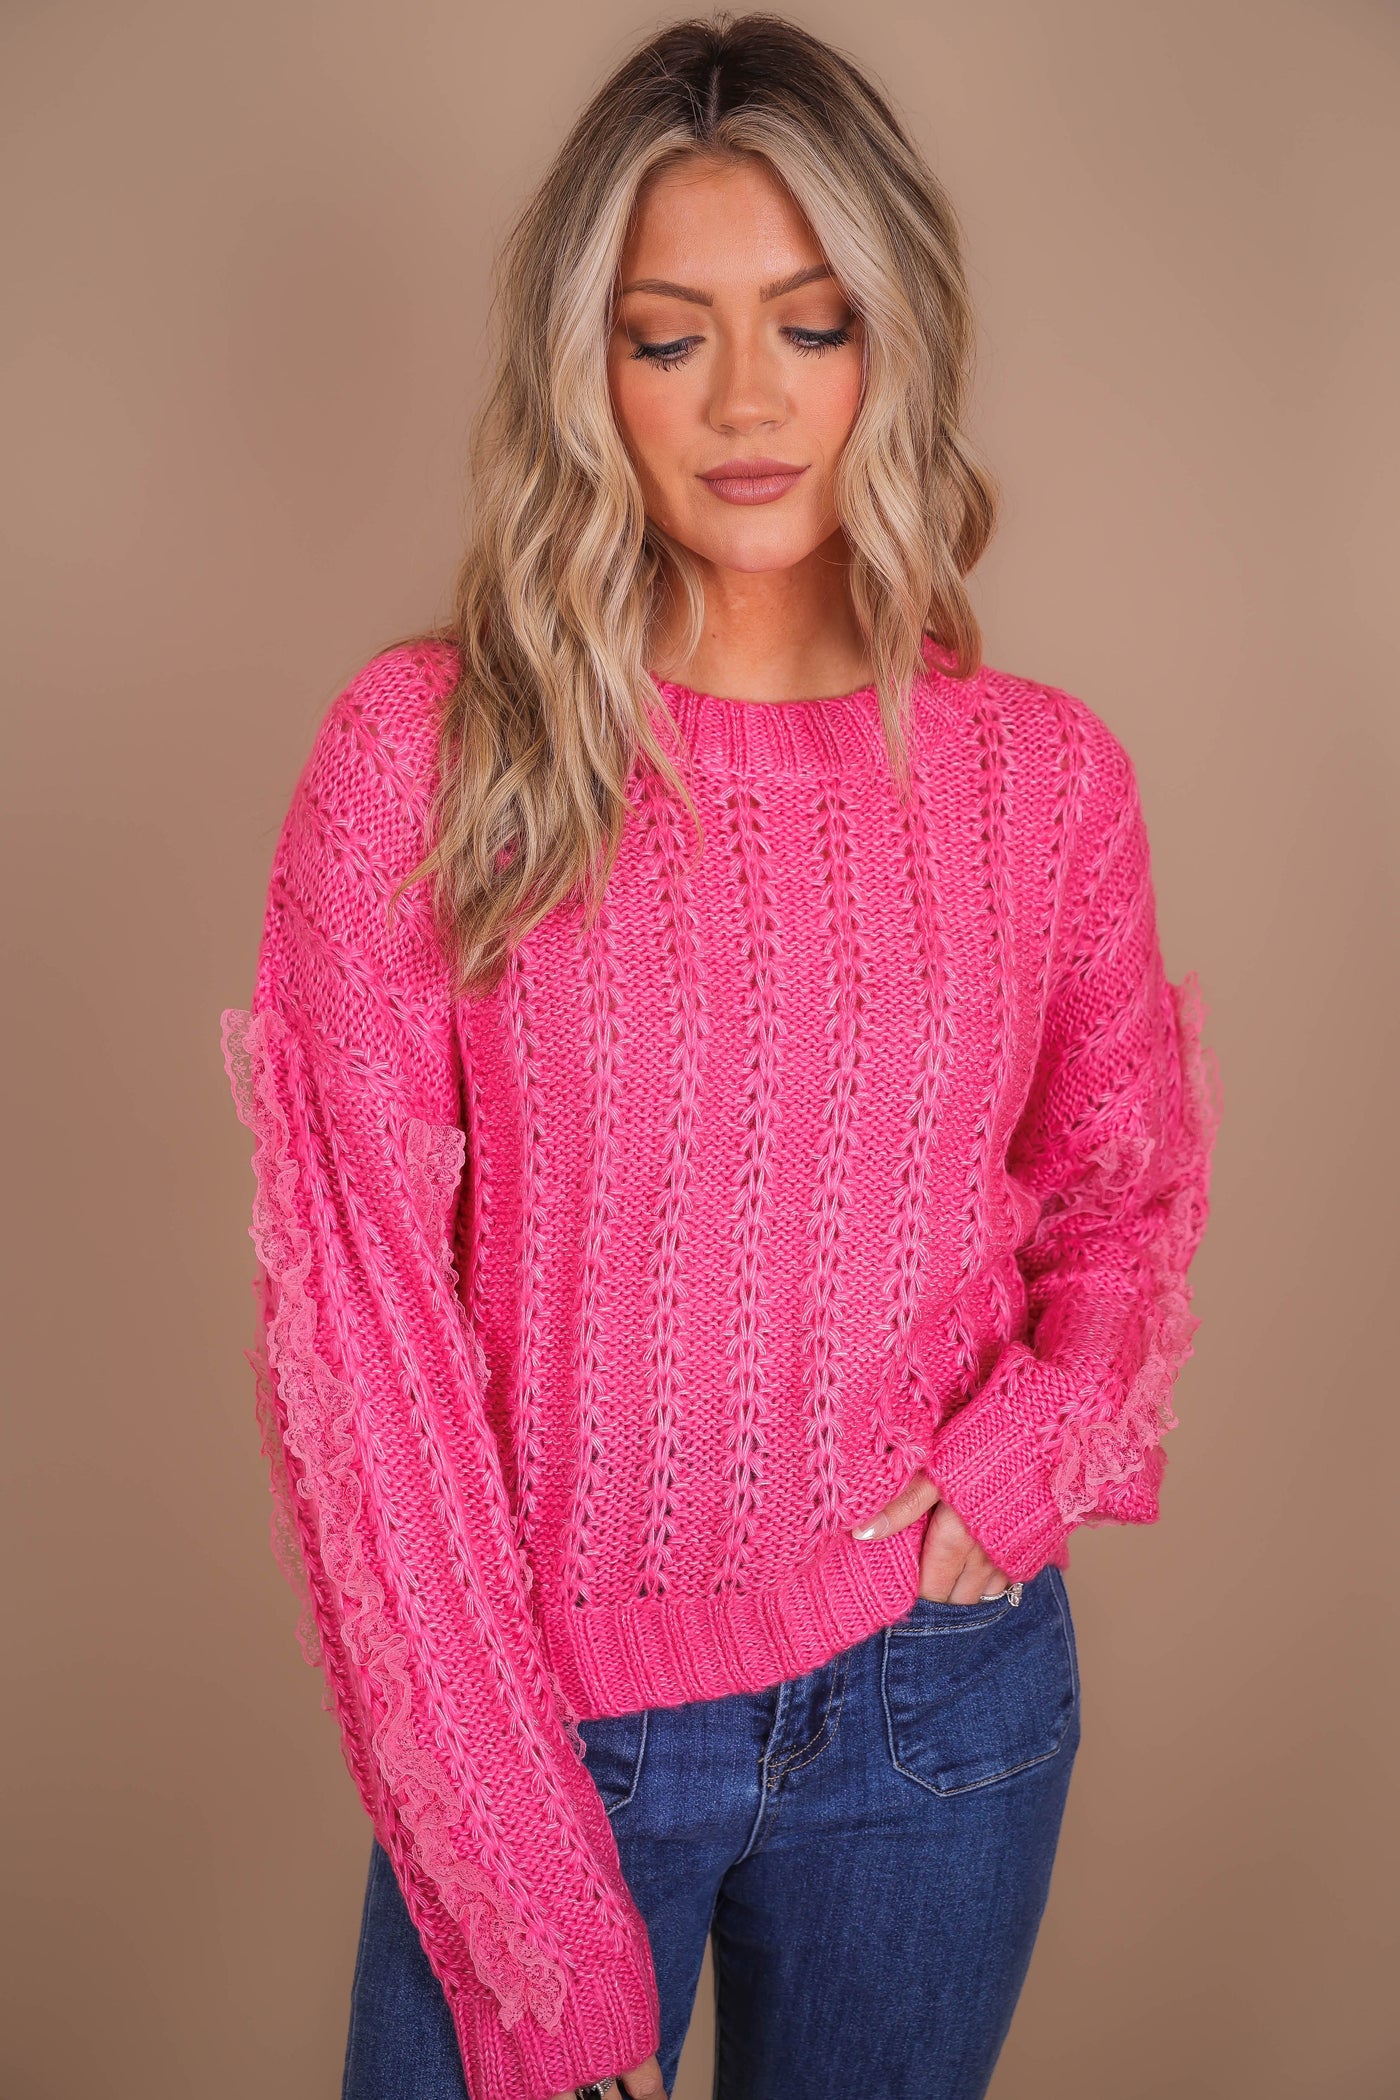 Hot Pink Knit and Lace Sweater- Love Fancy Sweater- Ballet Core Sweater